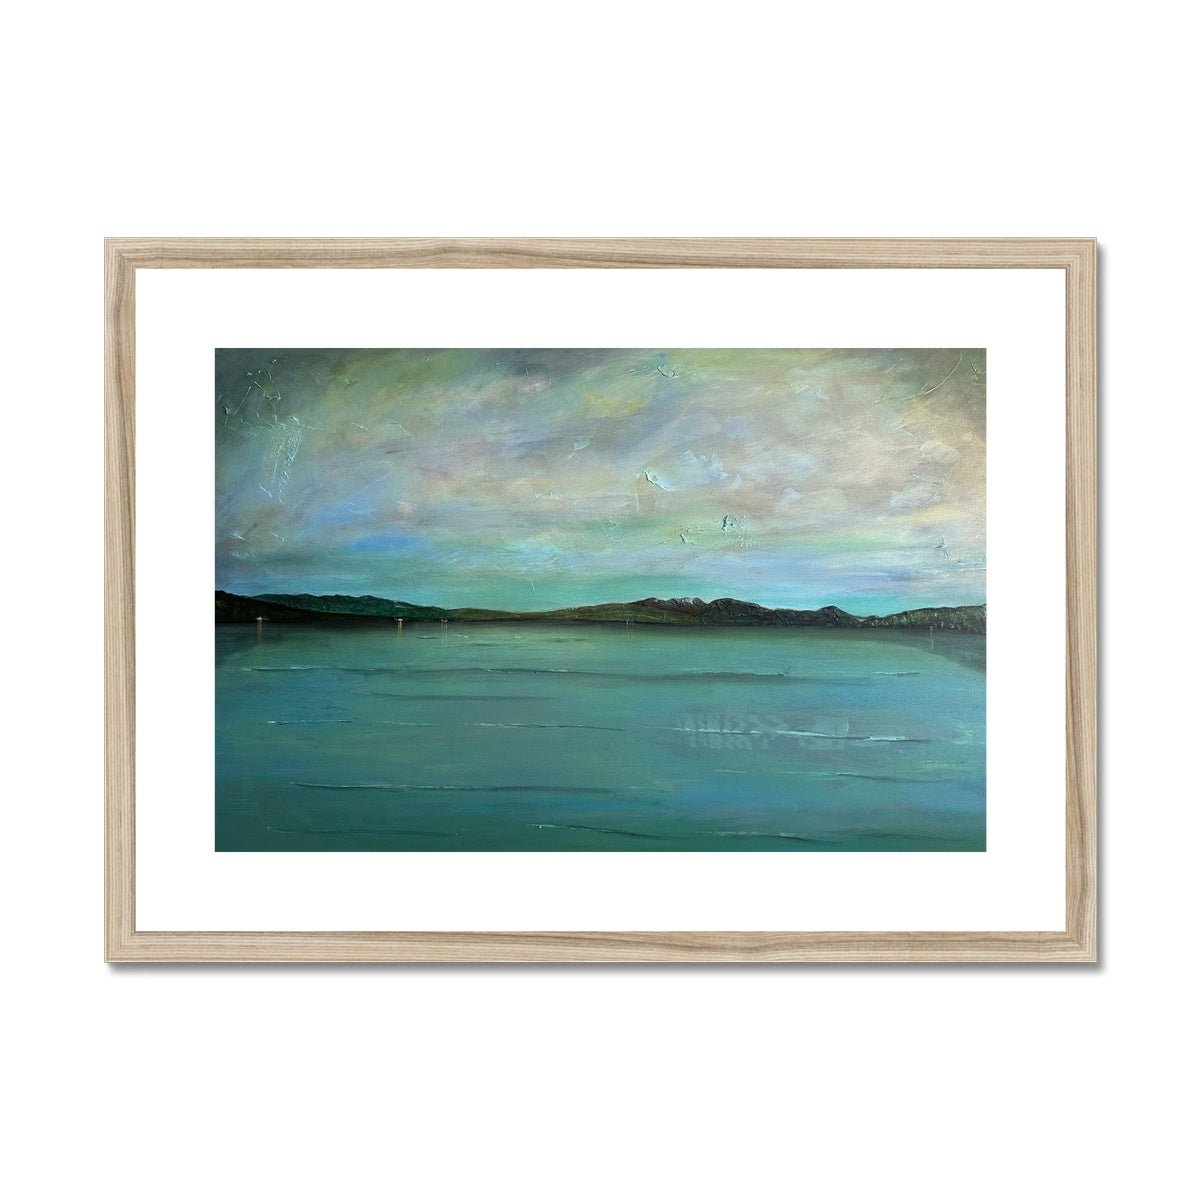 An Emerald Loch Lomond Painting | Framed & Mounted Prints From Scotland-Framed & Mounted Prints-Scottish Lochs & Mountains Art Gallery-A2 Landscape-Natural Frame-Paintings, Prints, Homeware, Art Gifts From Scotland By Scottish Artist Kevin Hunter